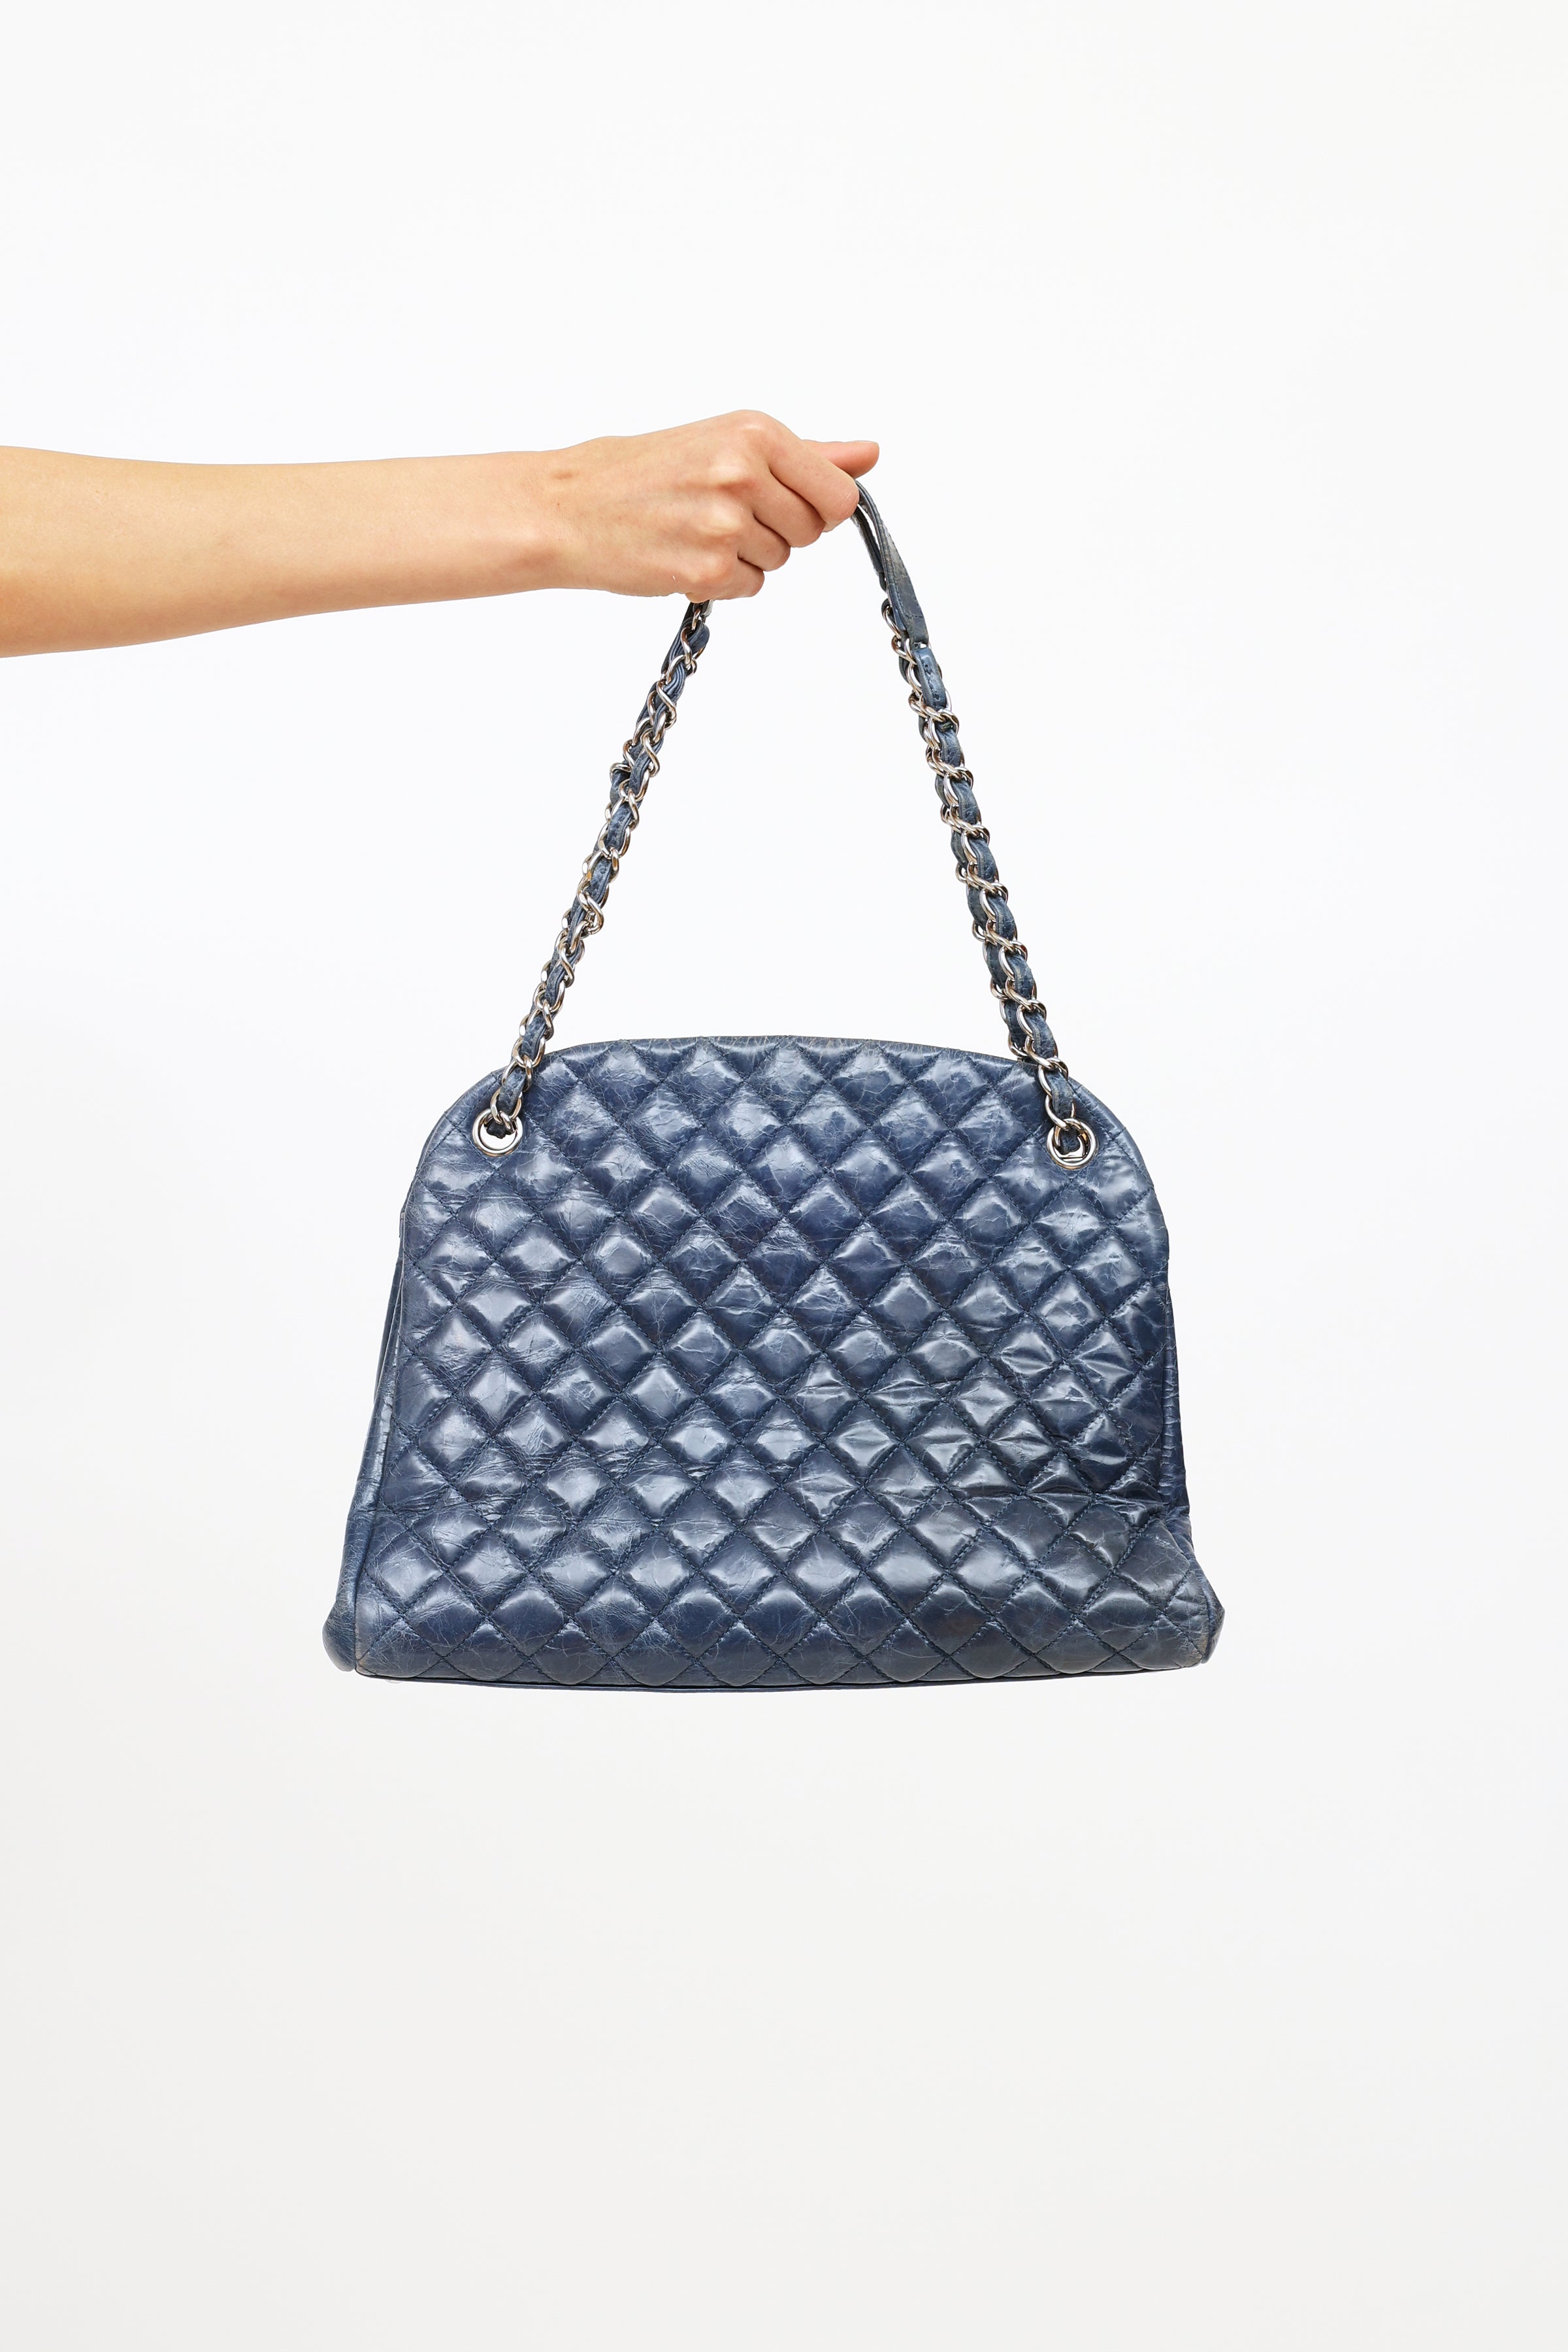 Chanel // 2011 Blue Leather Mademoiselle Bowler Bag – VSP Consignment